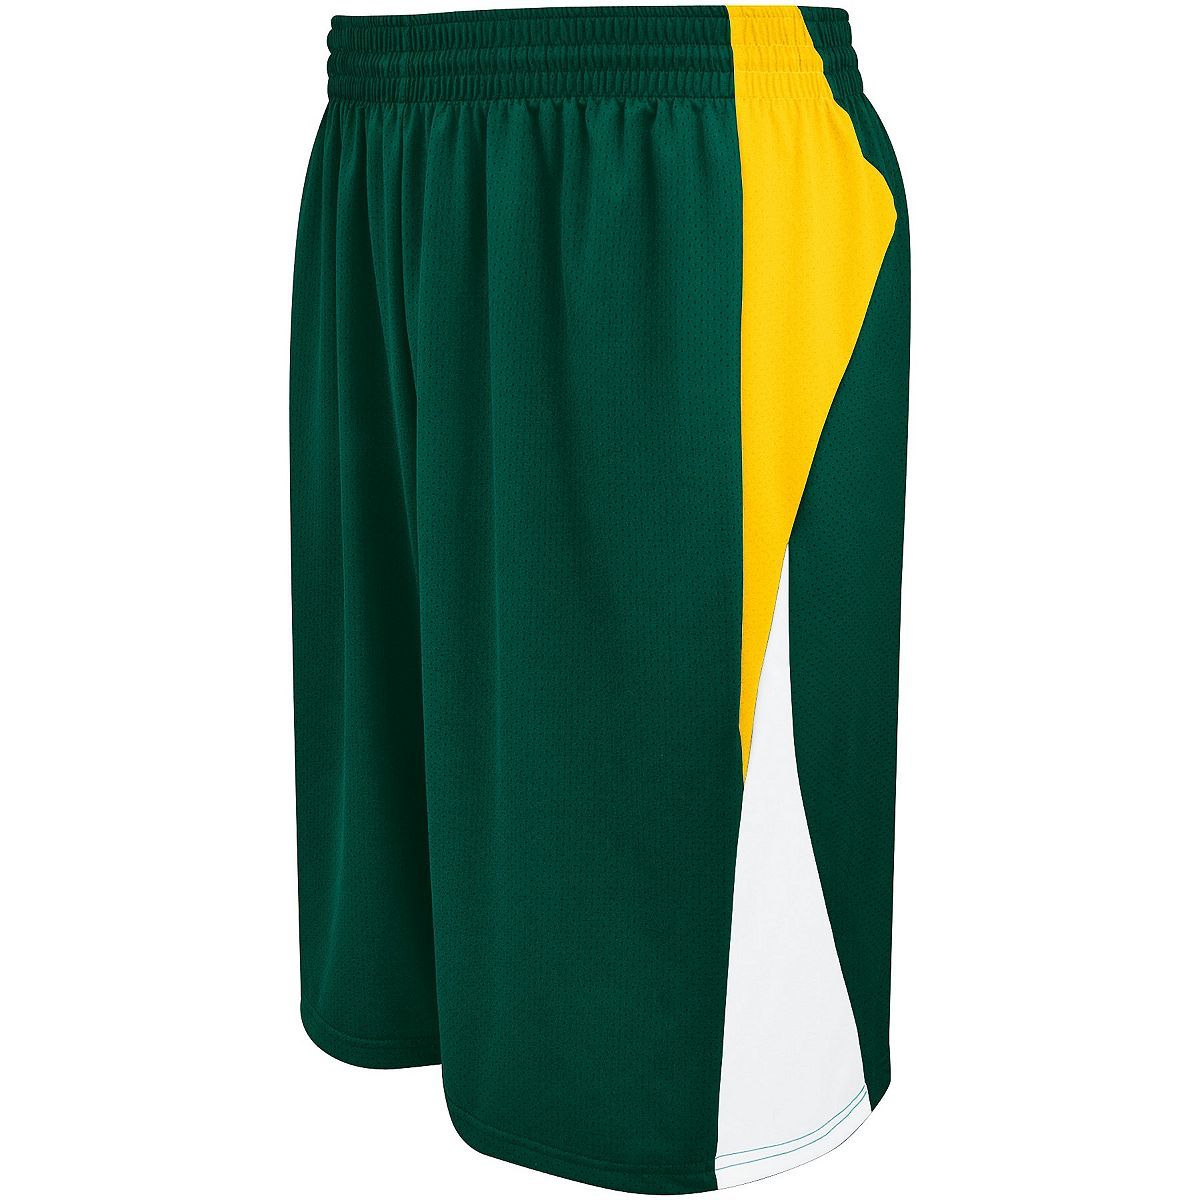 Holloway Campus Reversible Shorts in Forest/Athletic Gold/White  -Part of the Adult, Adult-Shorts, Basketball, Holloway, All-Sports, All-Sports-1 product lines at KanaleyCreations.com